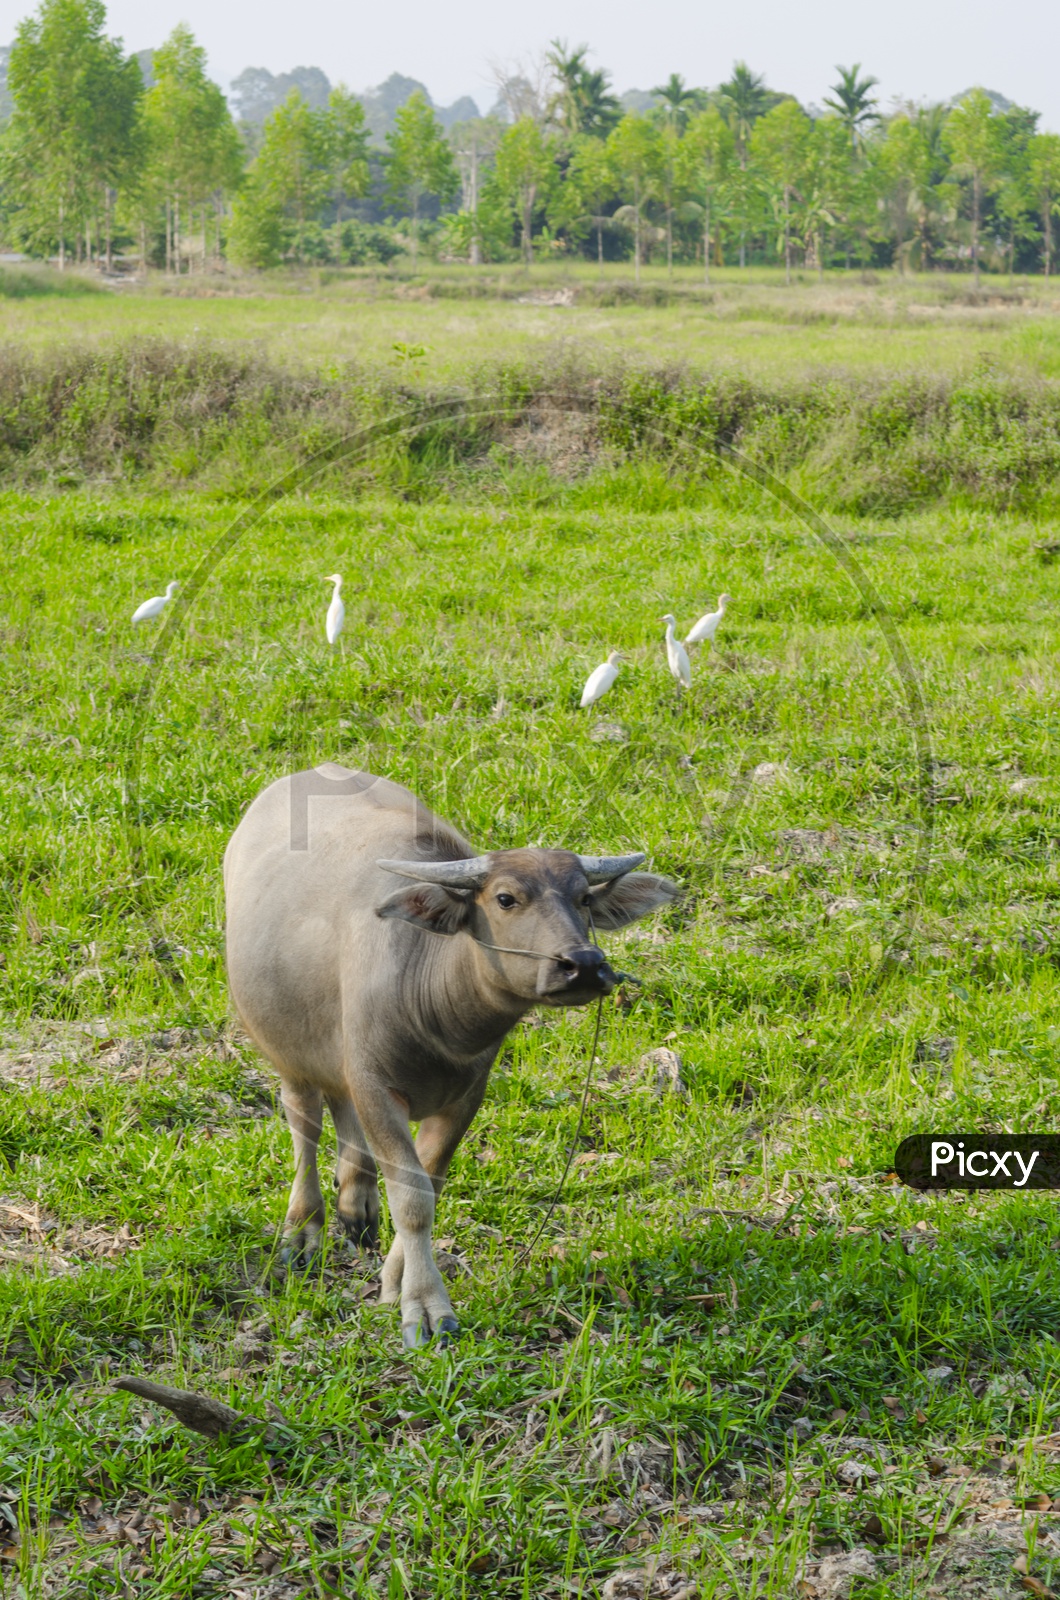 Water buffalo in a Agriculture Field, Thailand